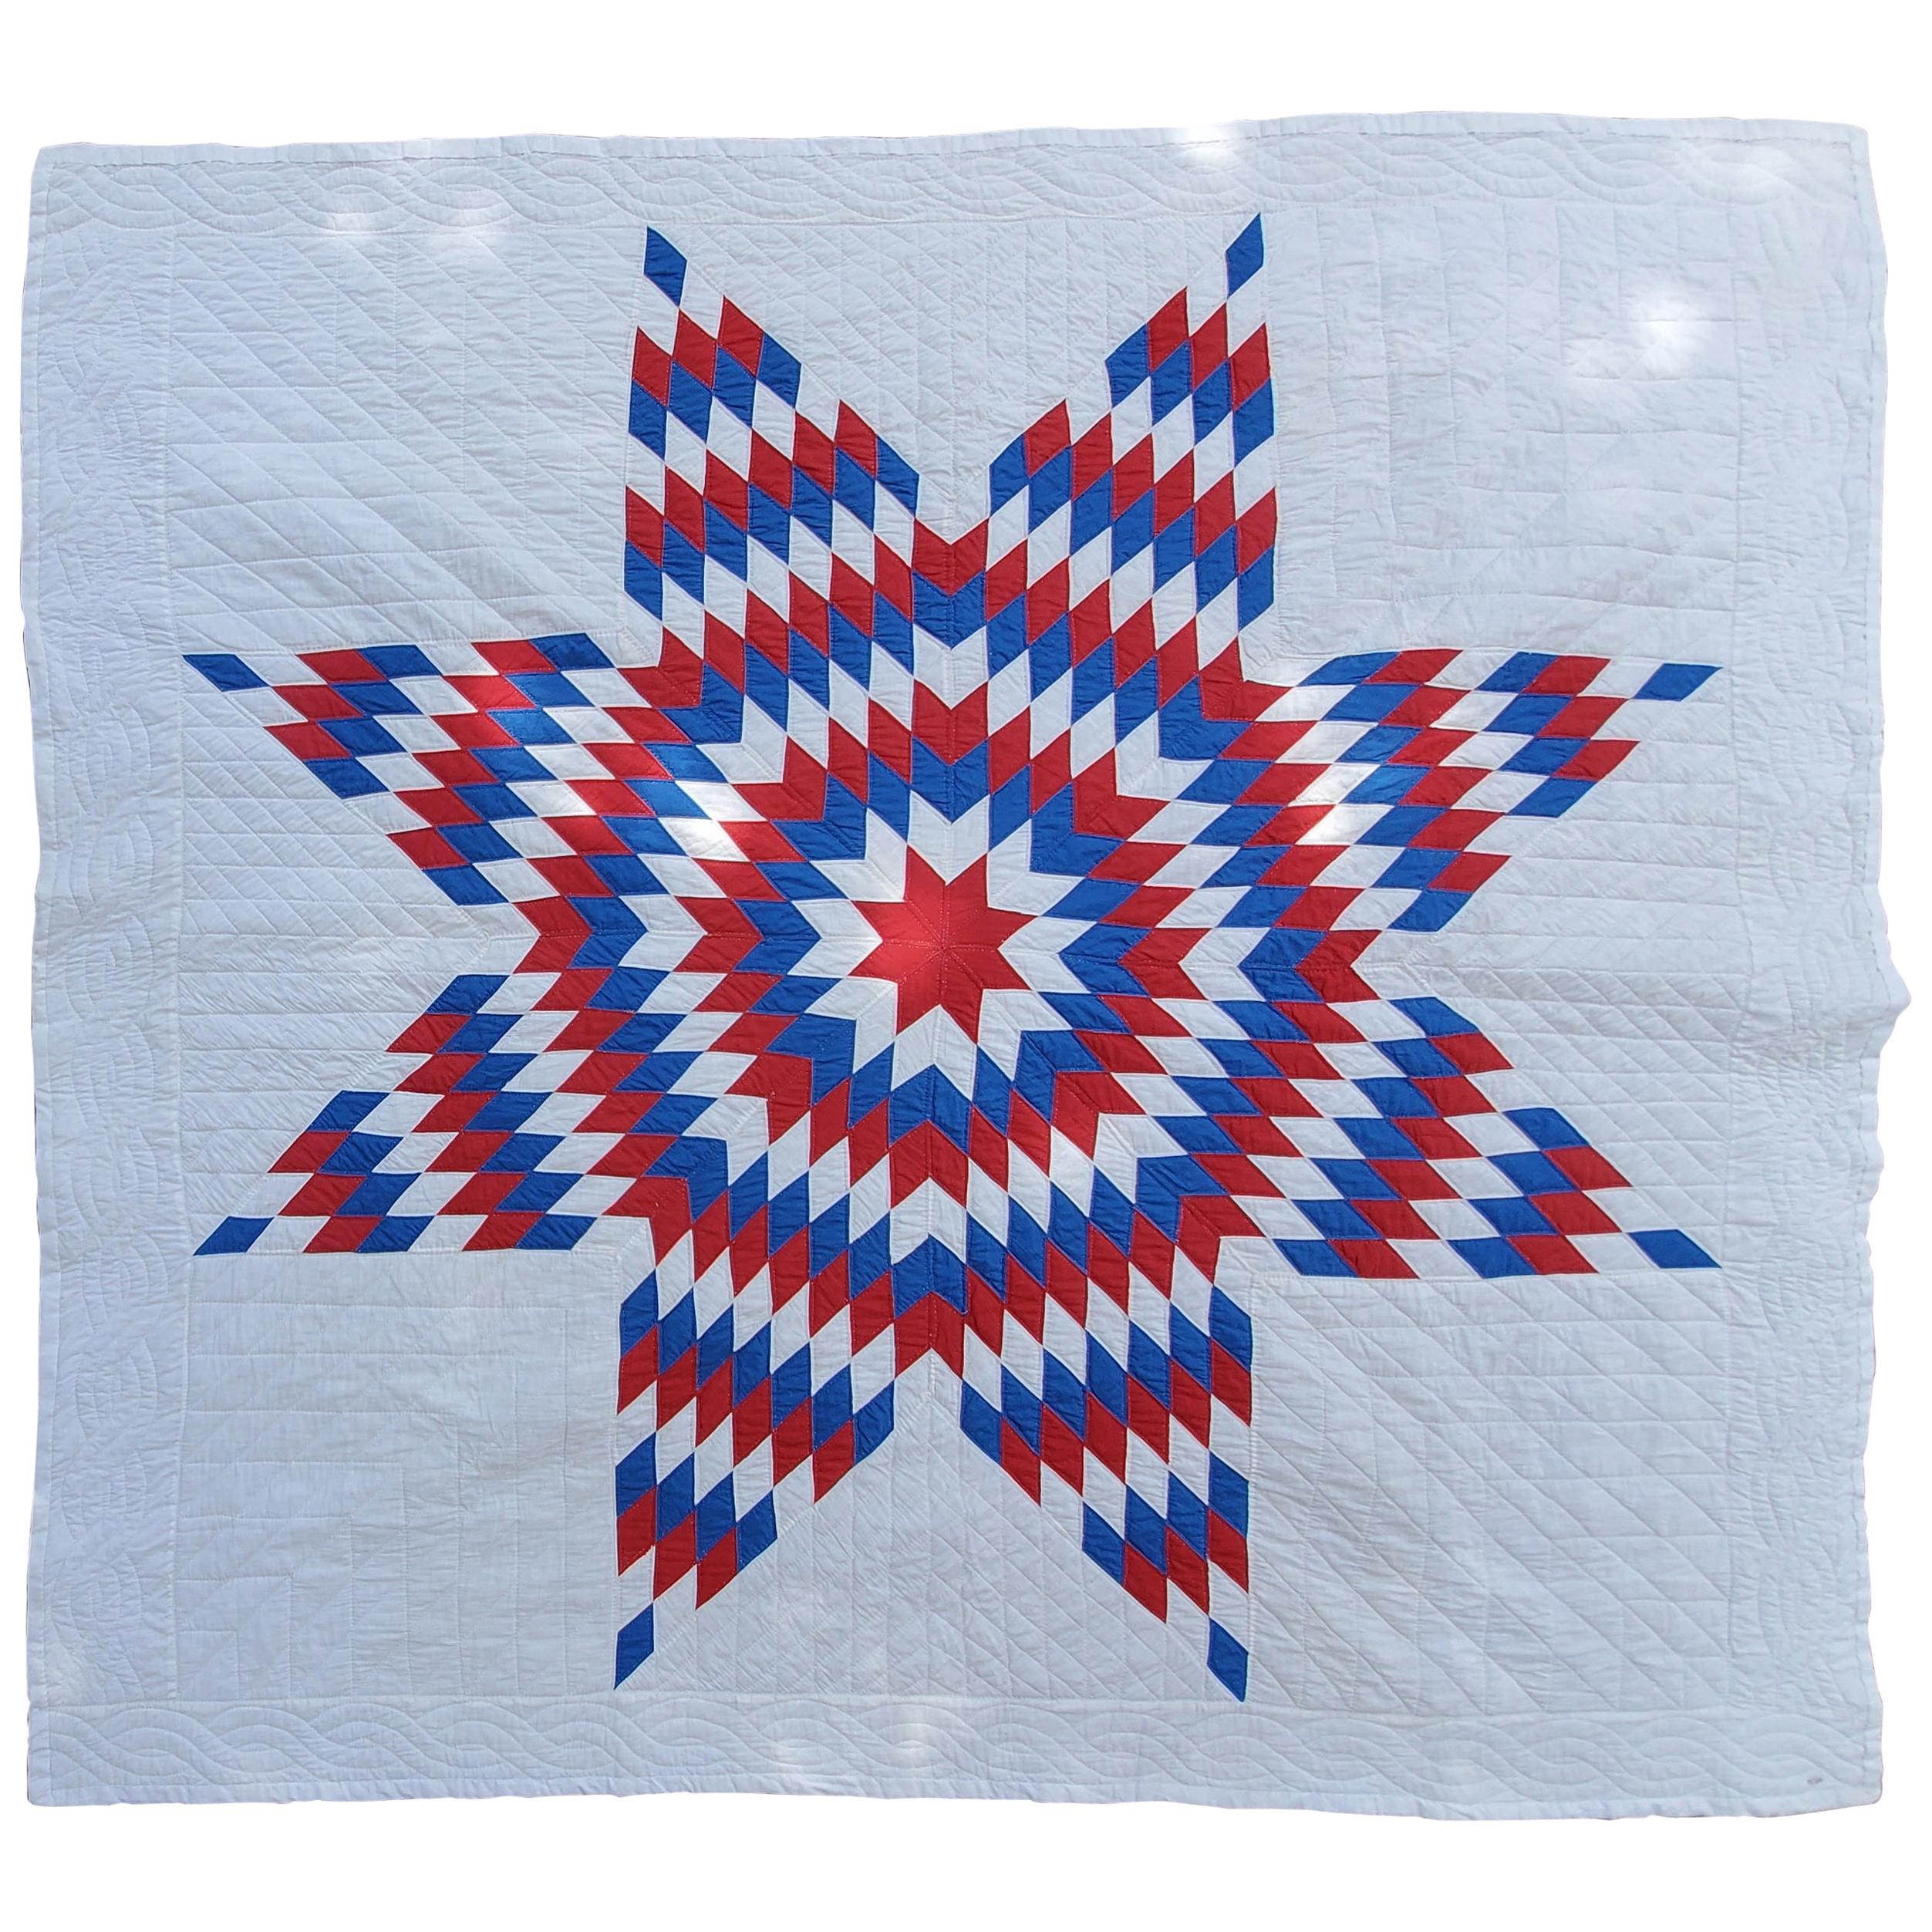 Fantastic Early 20thc Patriotic Star Quilt